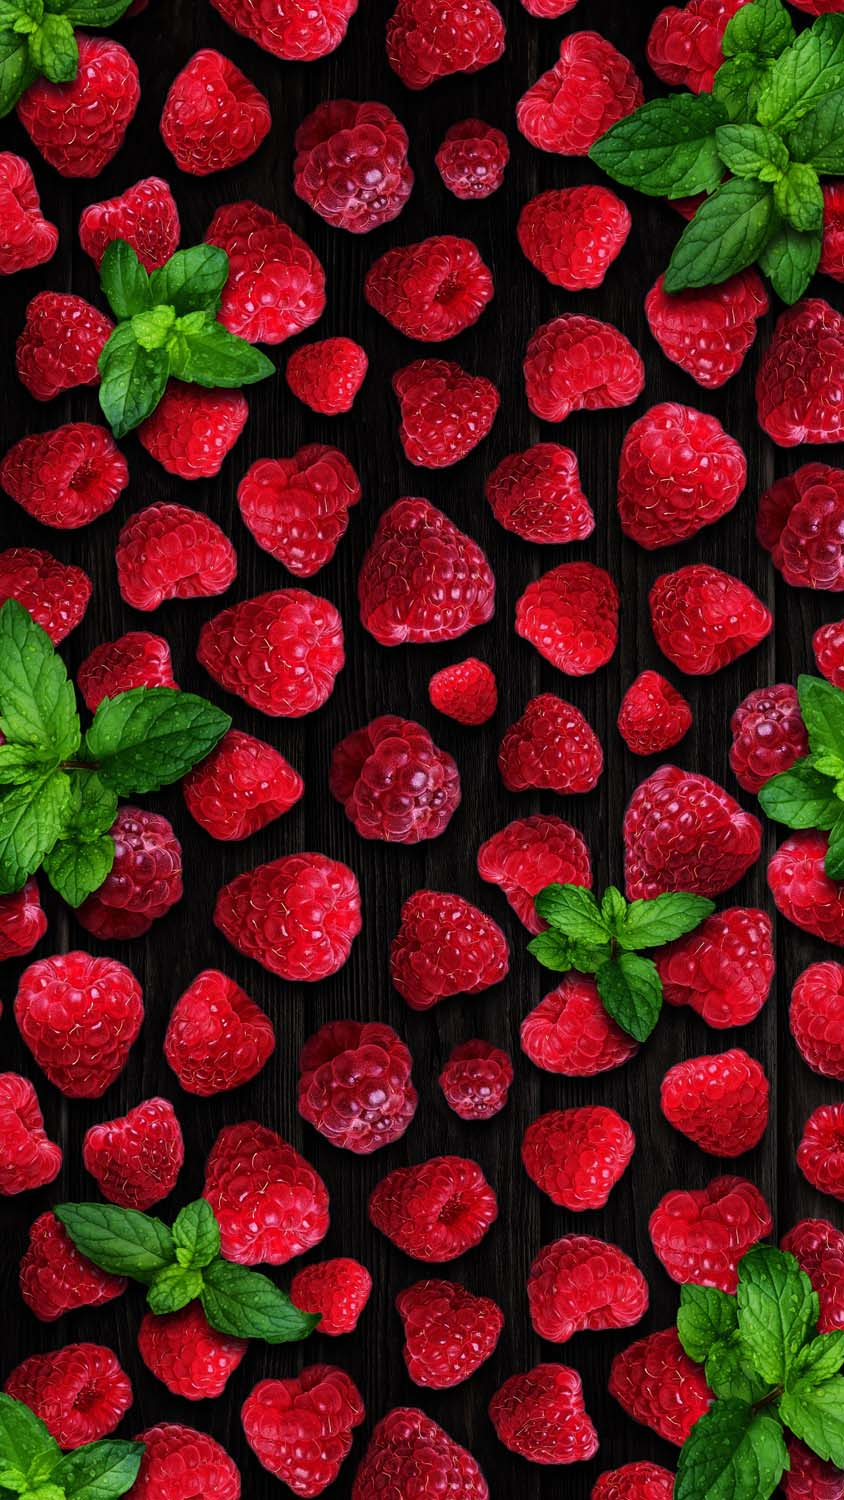 Strawberry IPhone Wallpaper HD  IPhone Wallpapers